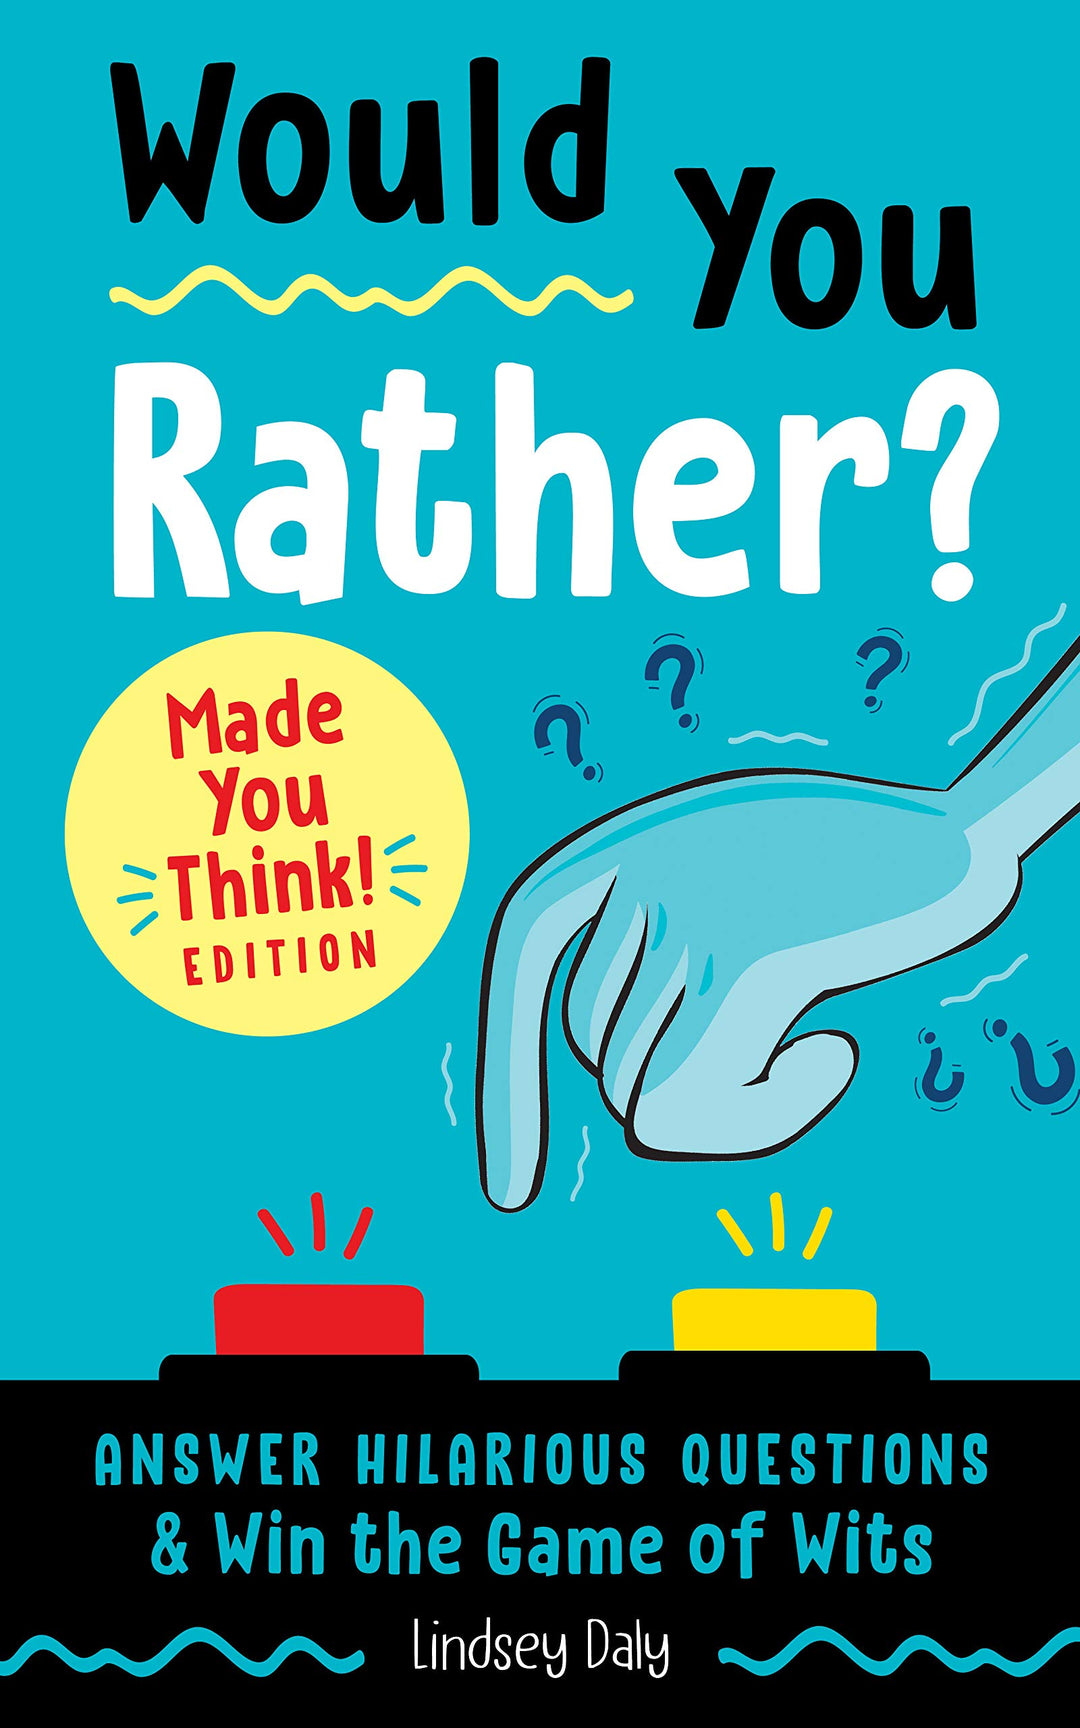 WOULD YOU RATHER - Kingfisher Road - Online Boutique